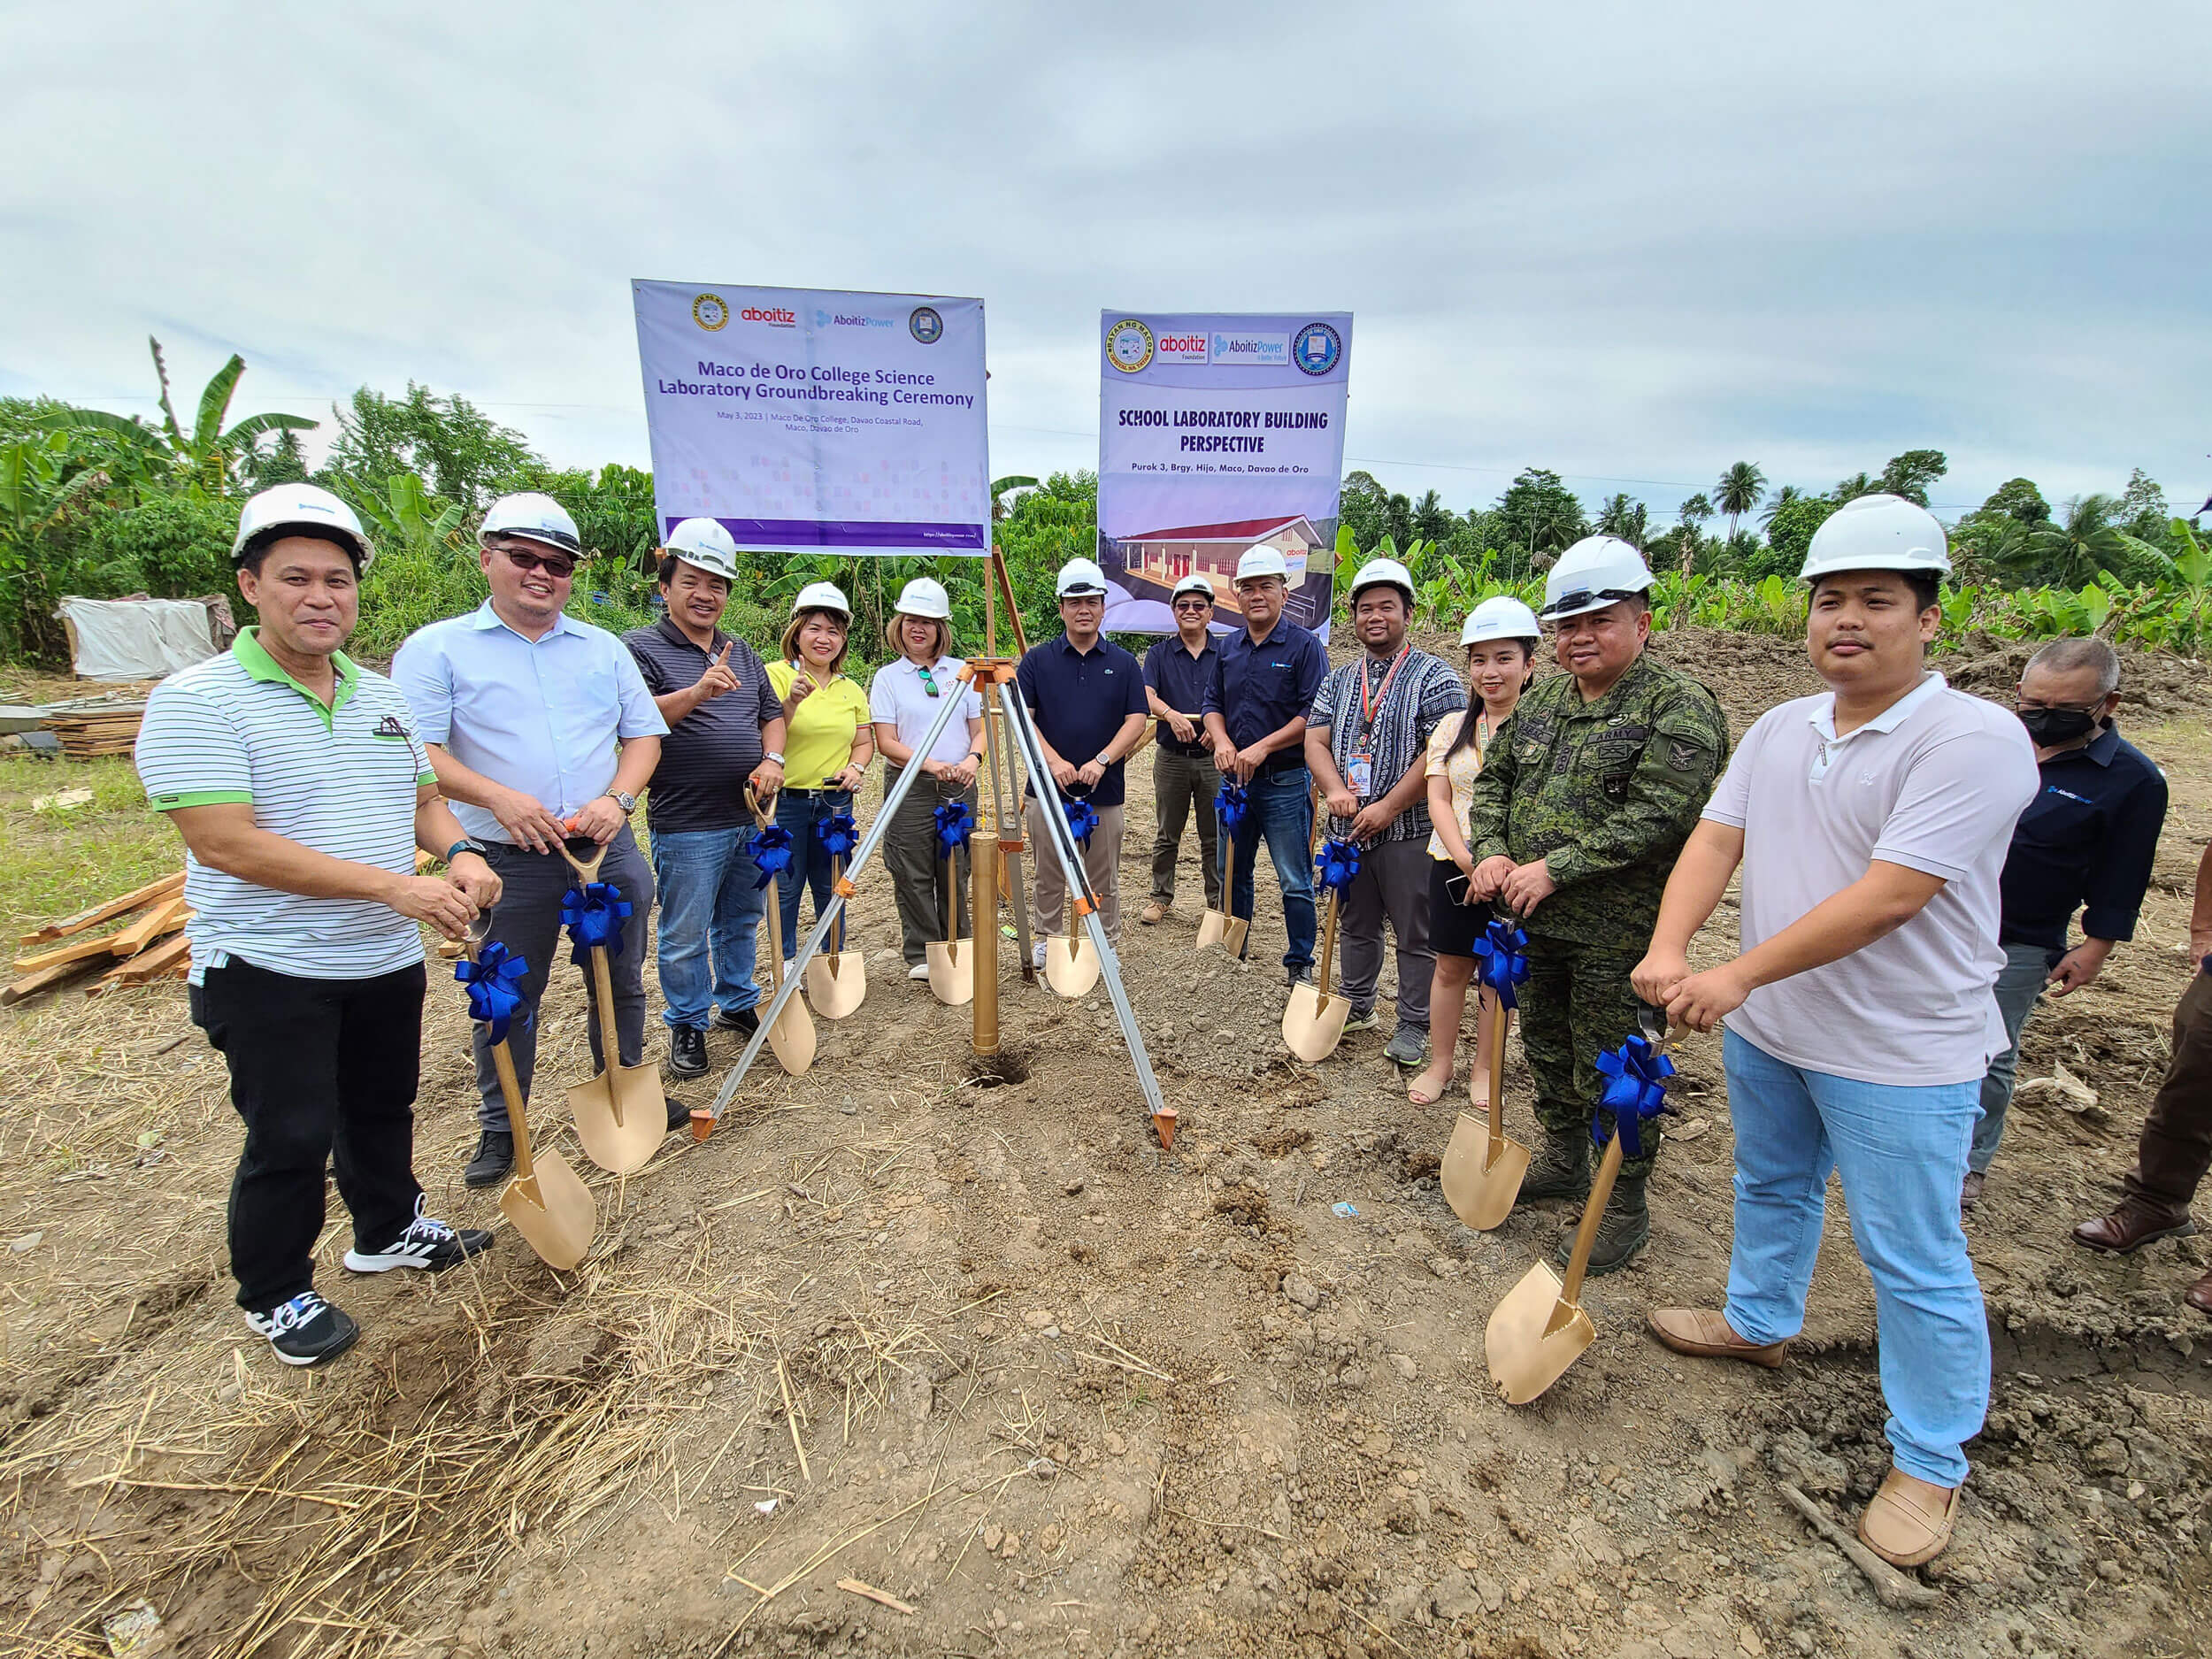 Groundbreaking for new science laboratory. Leading the ceremony are leaders from AboitizPower Thermal Group, Aboitiz Foundation Inc., 1001st Infantry PAG-ASA Brigade, and Municipality of Maco, together with Maco de Oro College administrators.